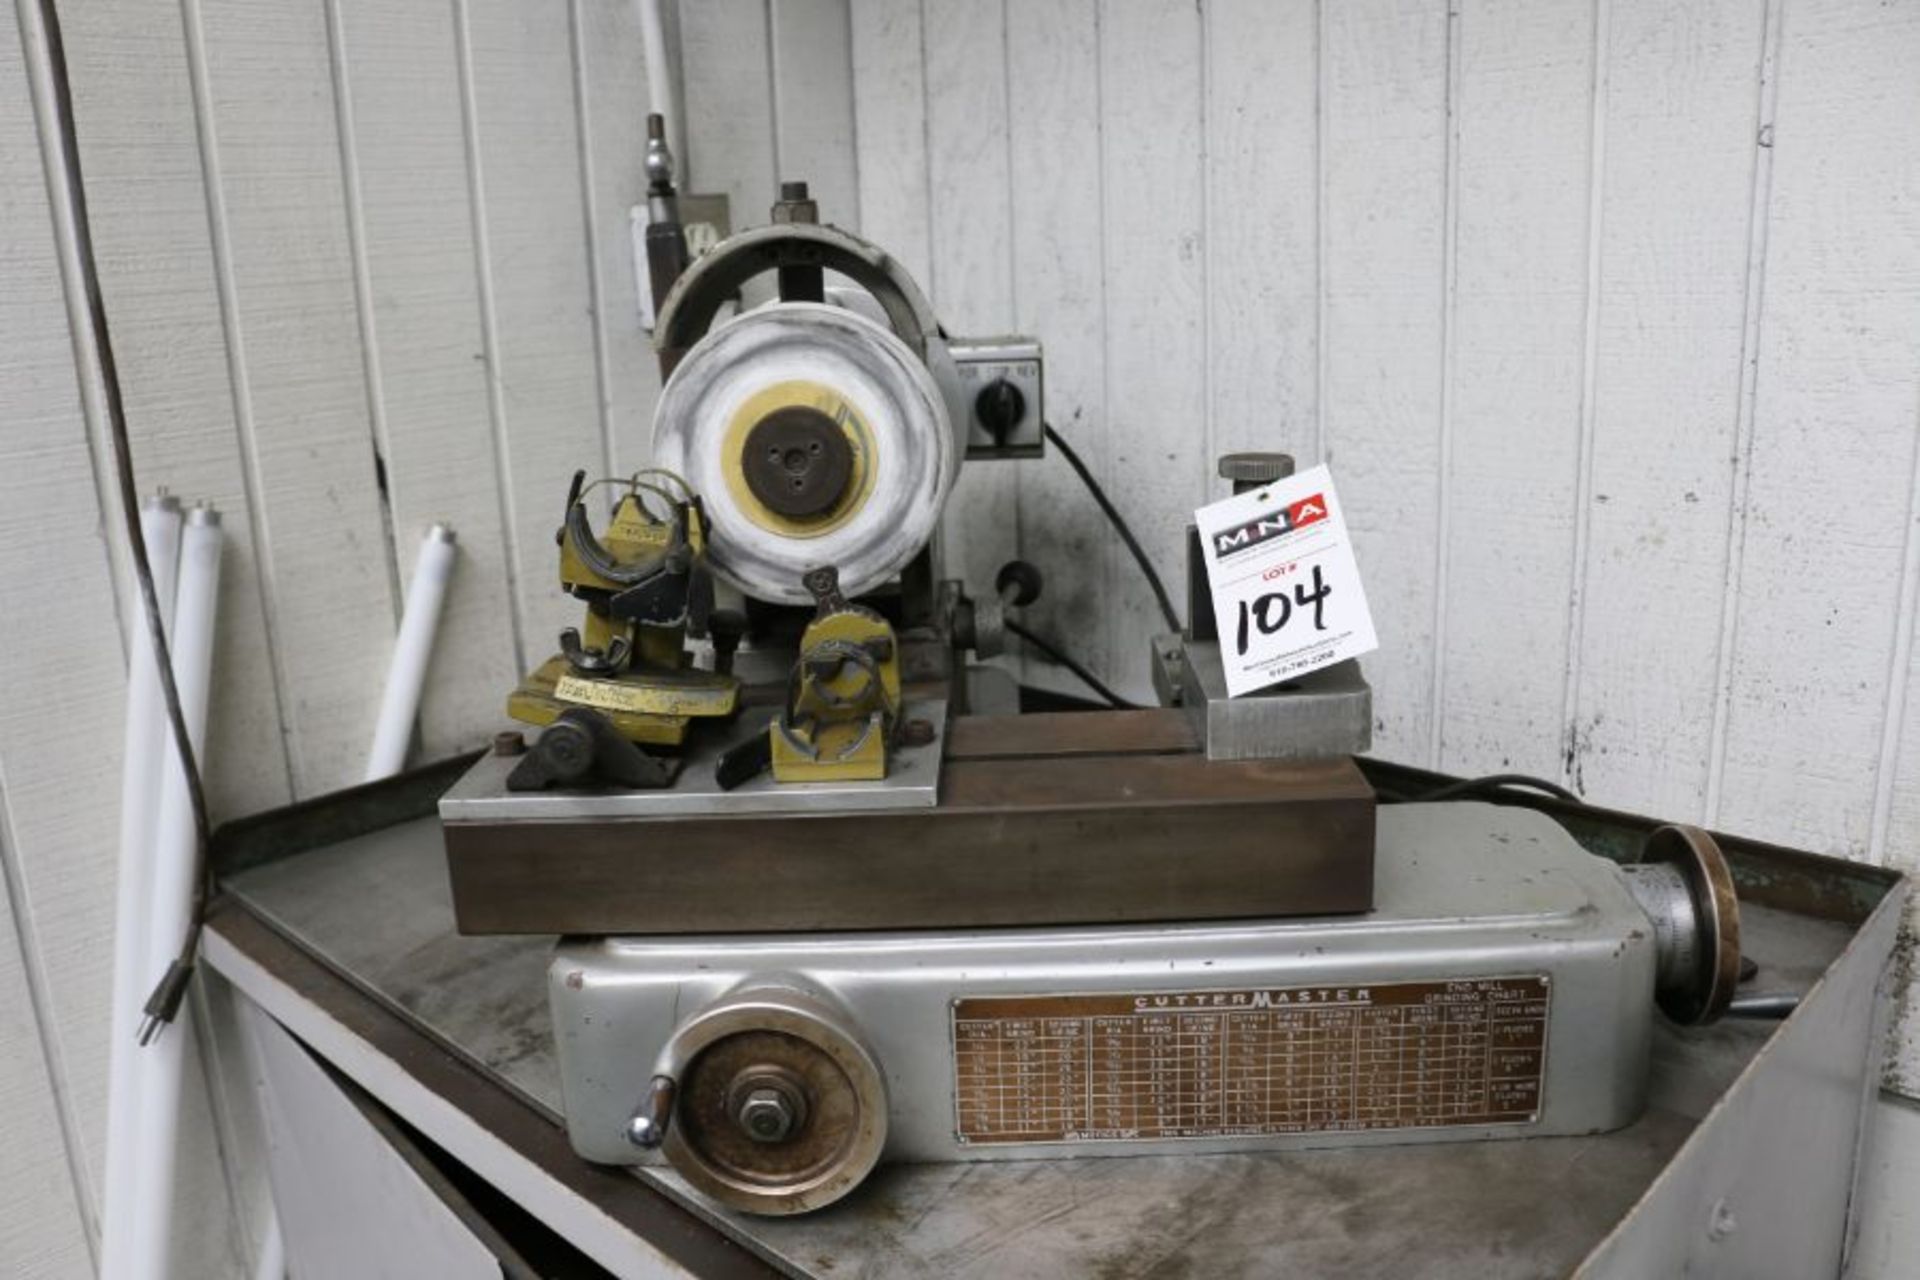 Cuttermaster Drill Grinder, s/n 71, New 1992